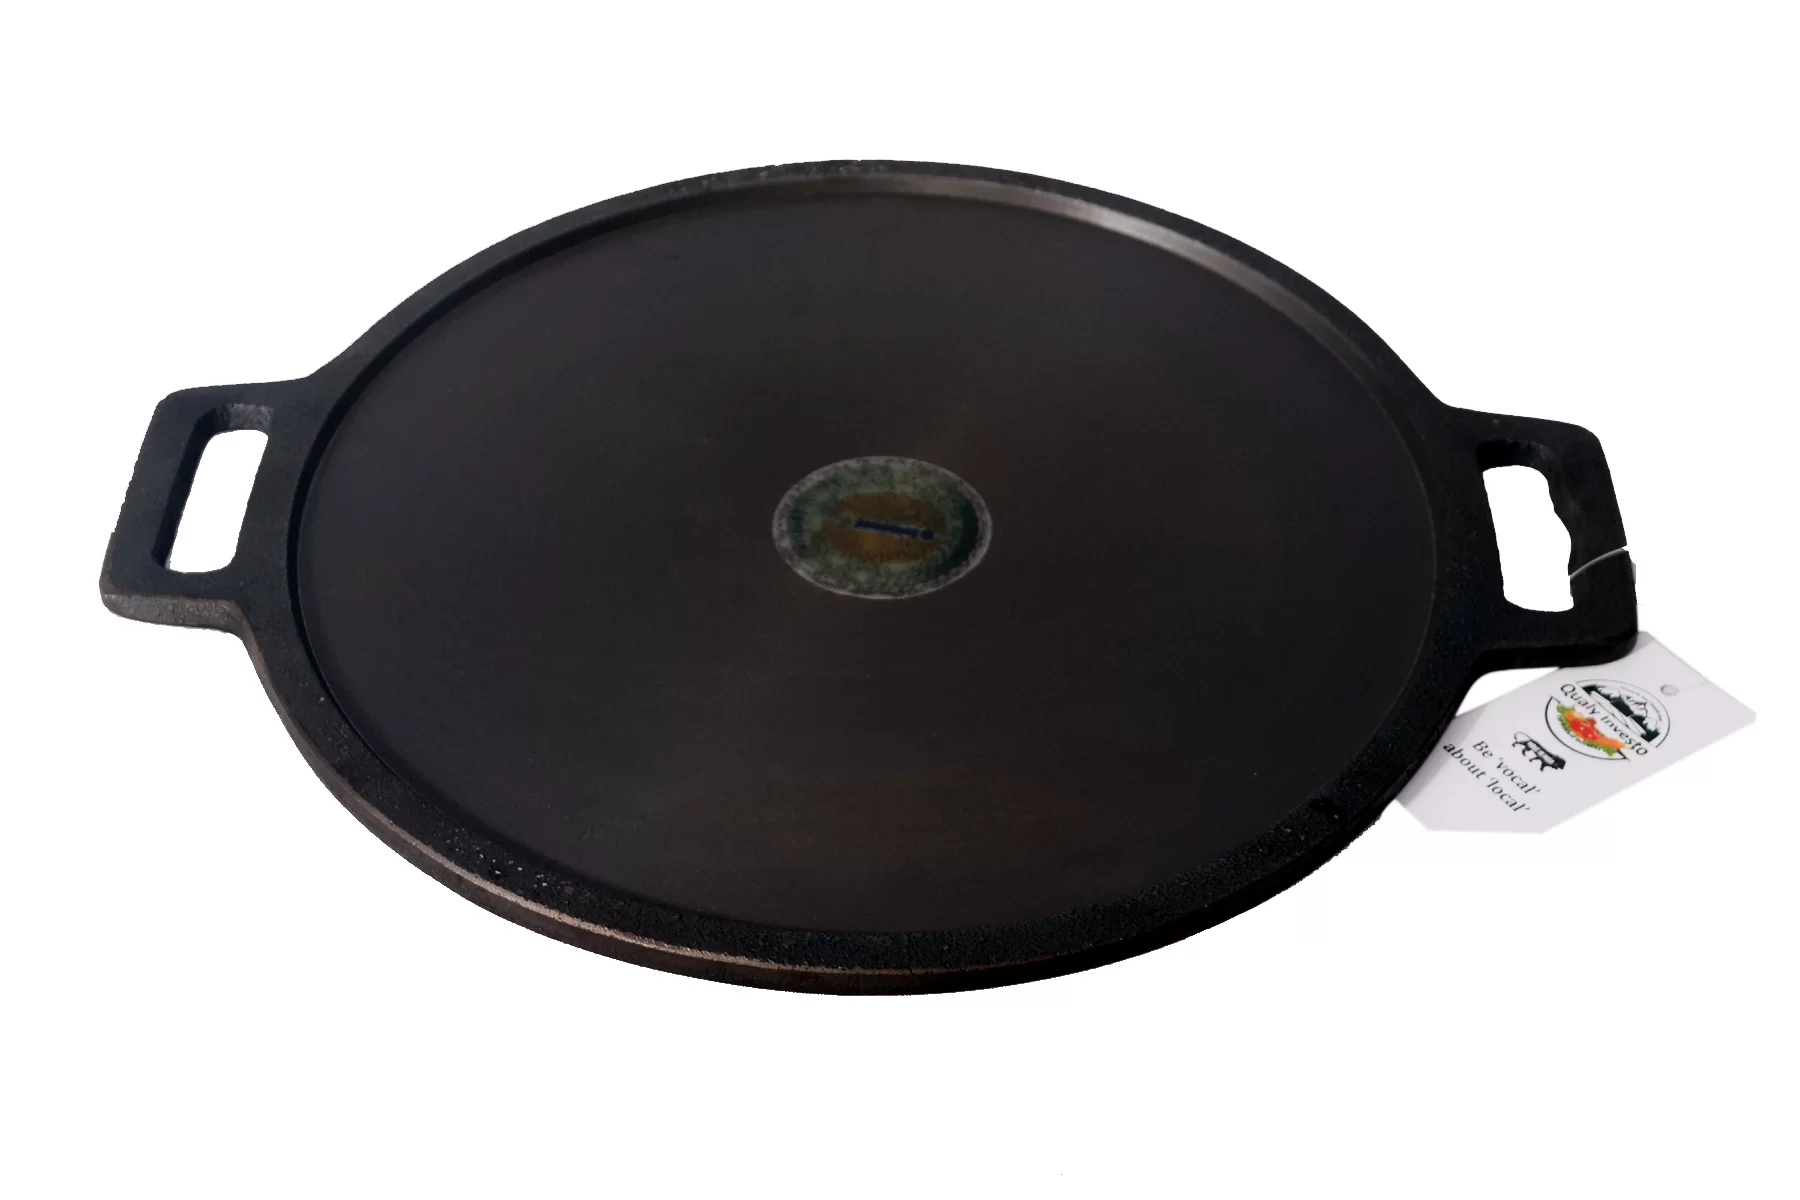 https://www.qualyinvesto.com/image/cache/catalog/images/dosatawadouble/qualy-investo-cast-iron-pre-seasoned-12-inch-dosa-tawa-suitable-for-gas-induction-and-electric-cooktops-1800x1200.jpeg.webp